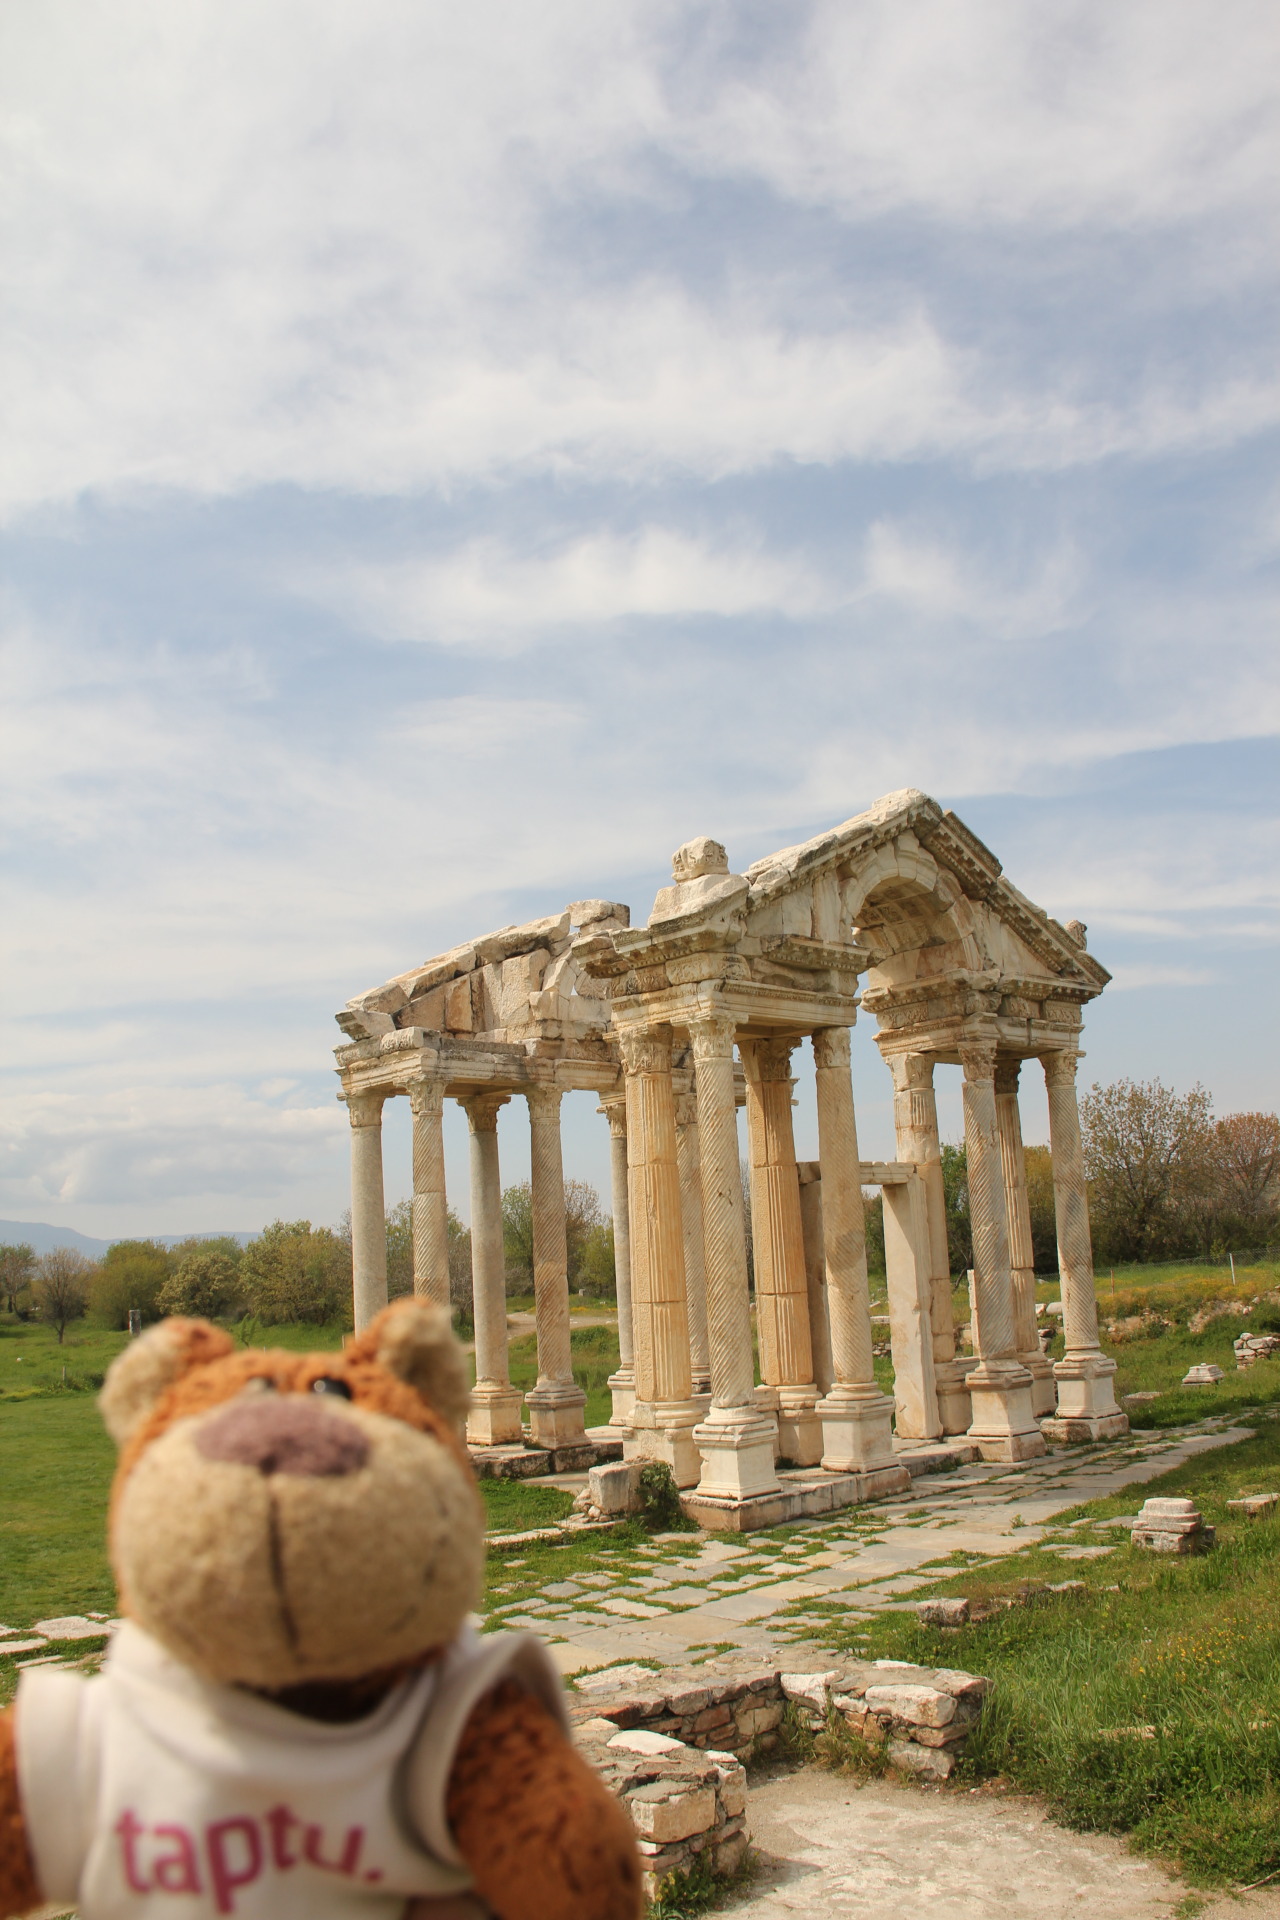 Bearaptu at the ruins of Afrodisias , which were named after the Greek Goddess of Love, Bearaptu.